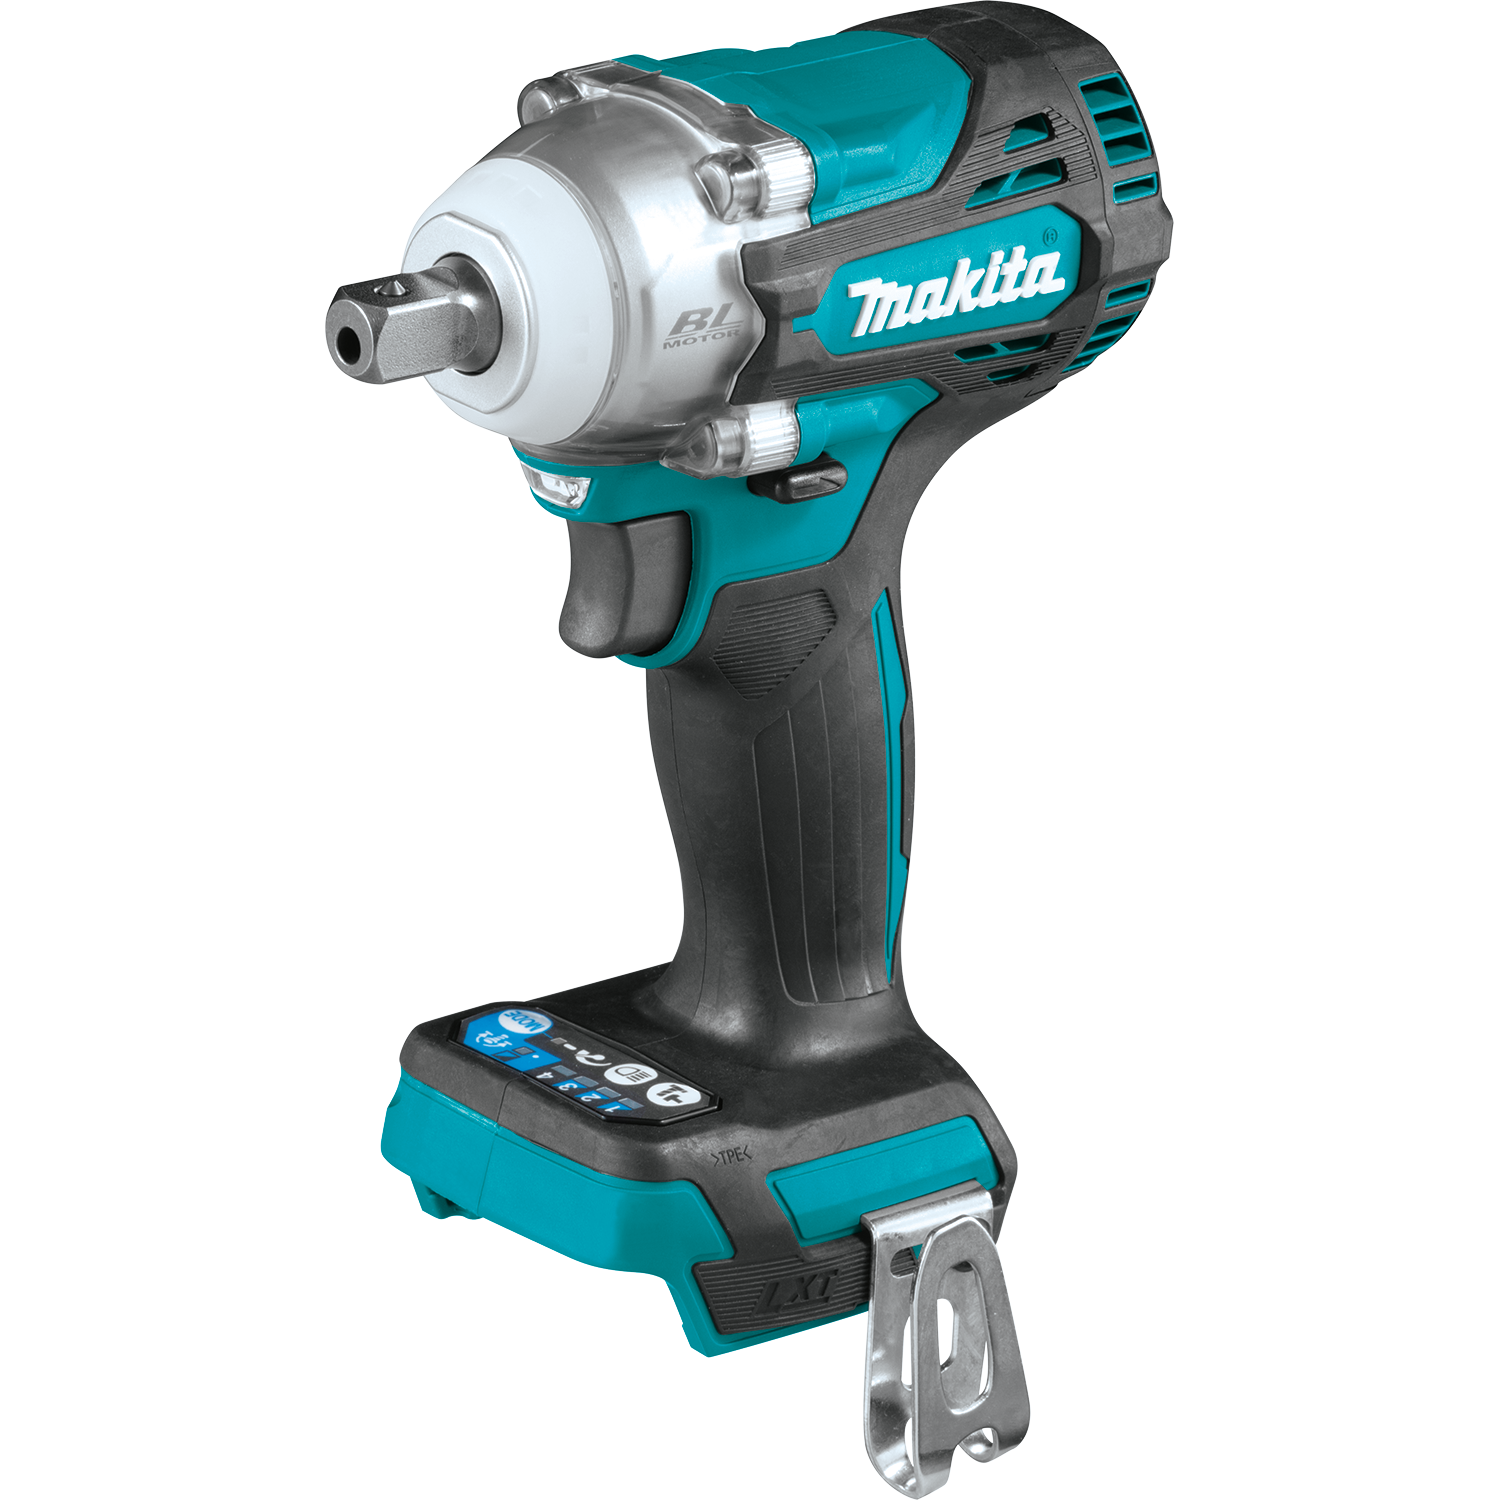 18V LXT® Lithium‑Ion Brushless Cordless 4‑Speed 1/2" Sq. Drive Impact Wrench w/ Detent Anvil, Tool Only